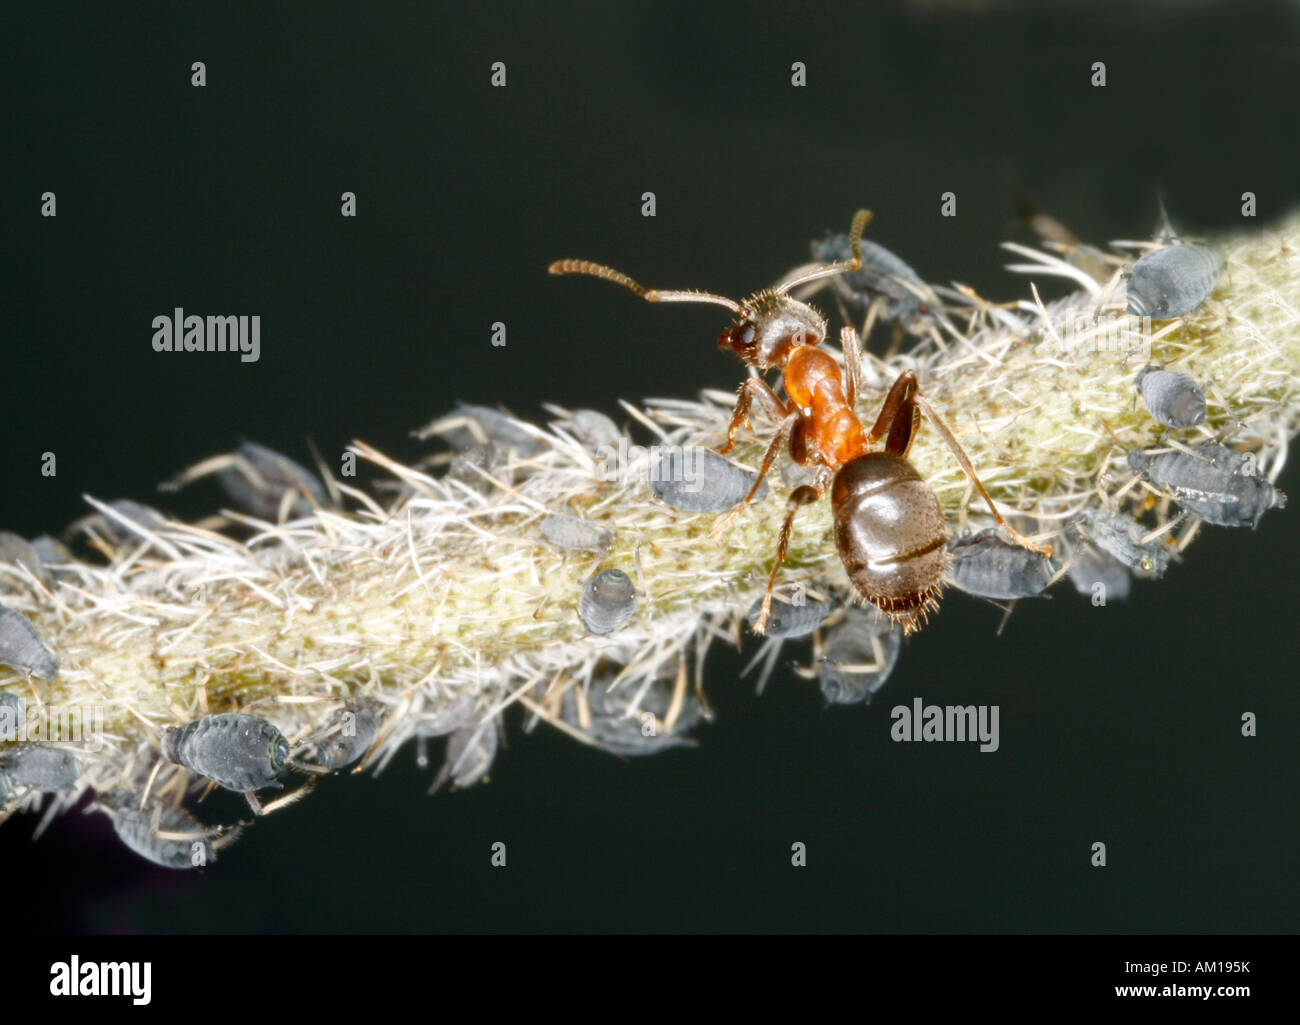 Red ant (Formica rufa) on a plant with plant lice (Aphidoidea) Stock Photo